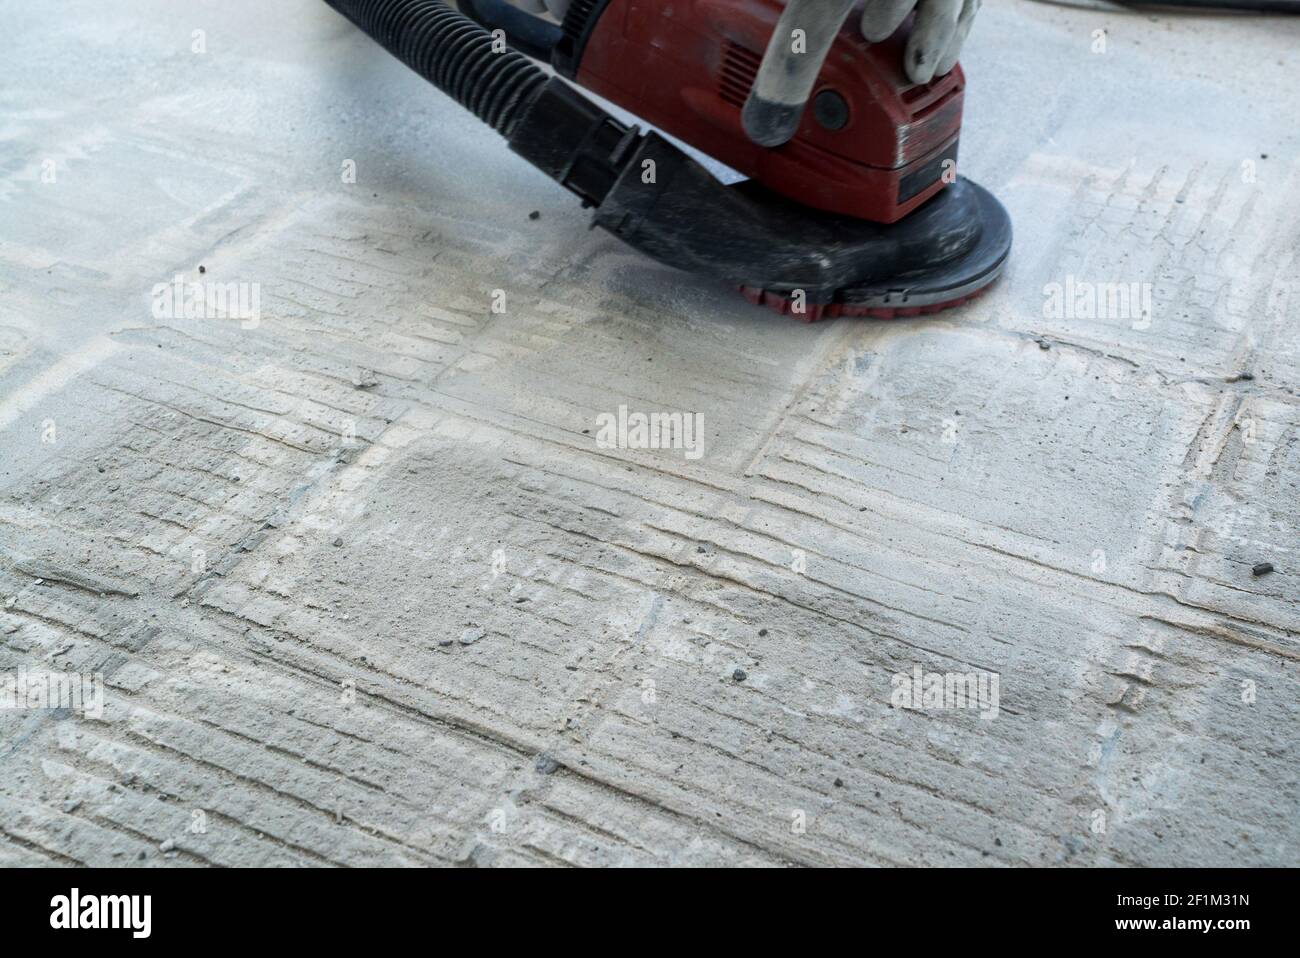 Construction worker uses a concrete grinder for removing tile glue and  resin during renovation work Stock Photo - Alamy